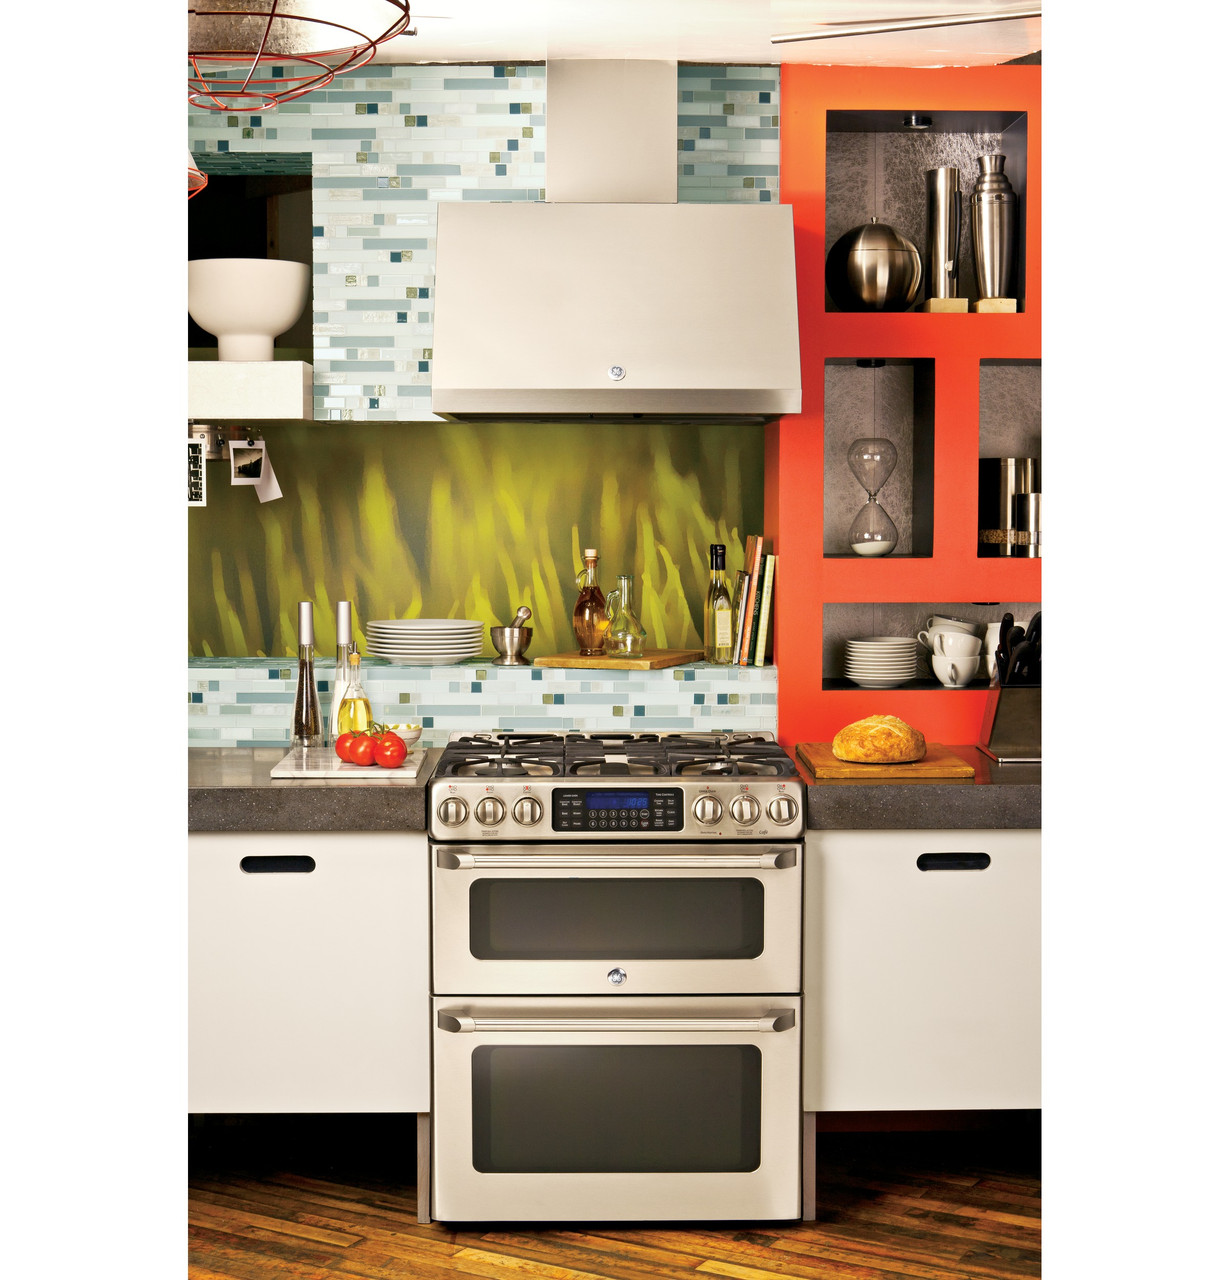 GE 30 Inch. 6.7 cu. ft. Slide-In Front Control GAS Double Oven Range with  True Convection